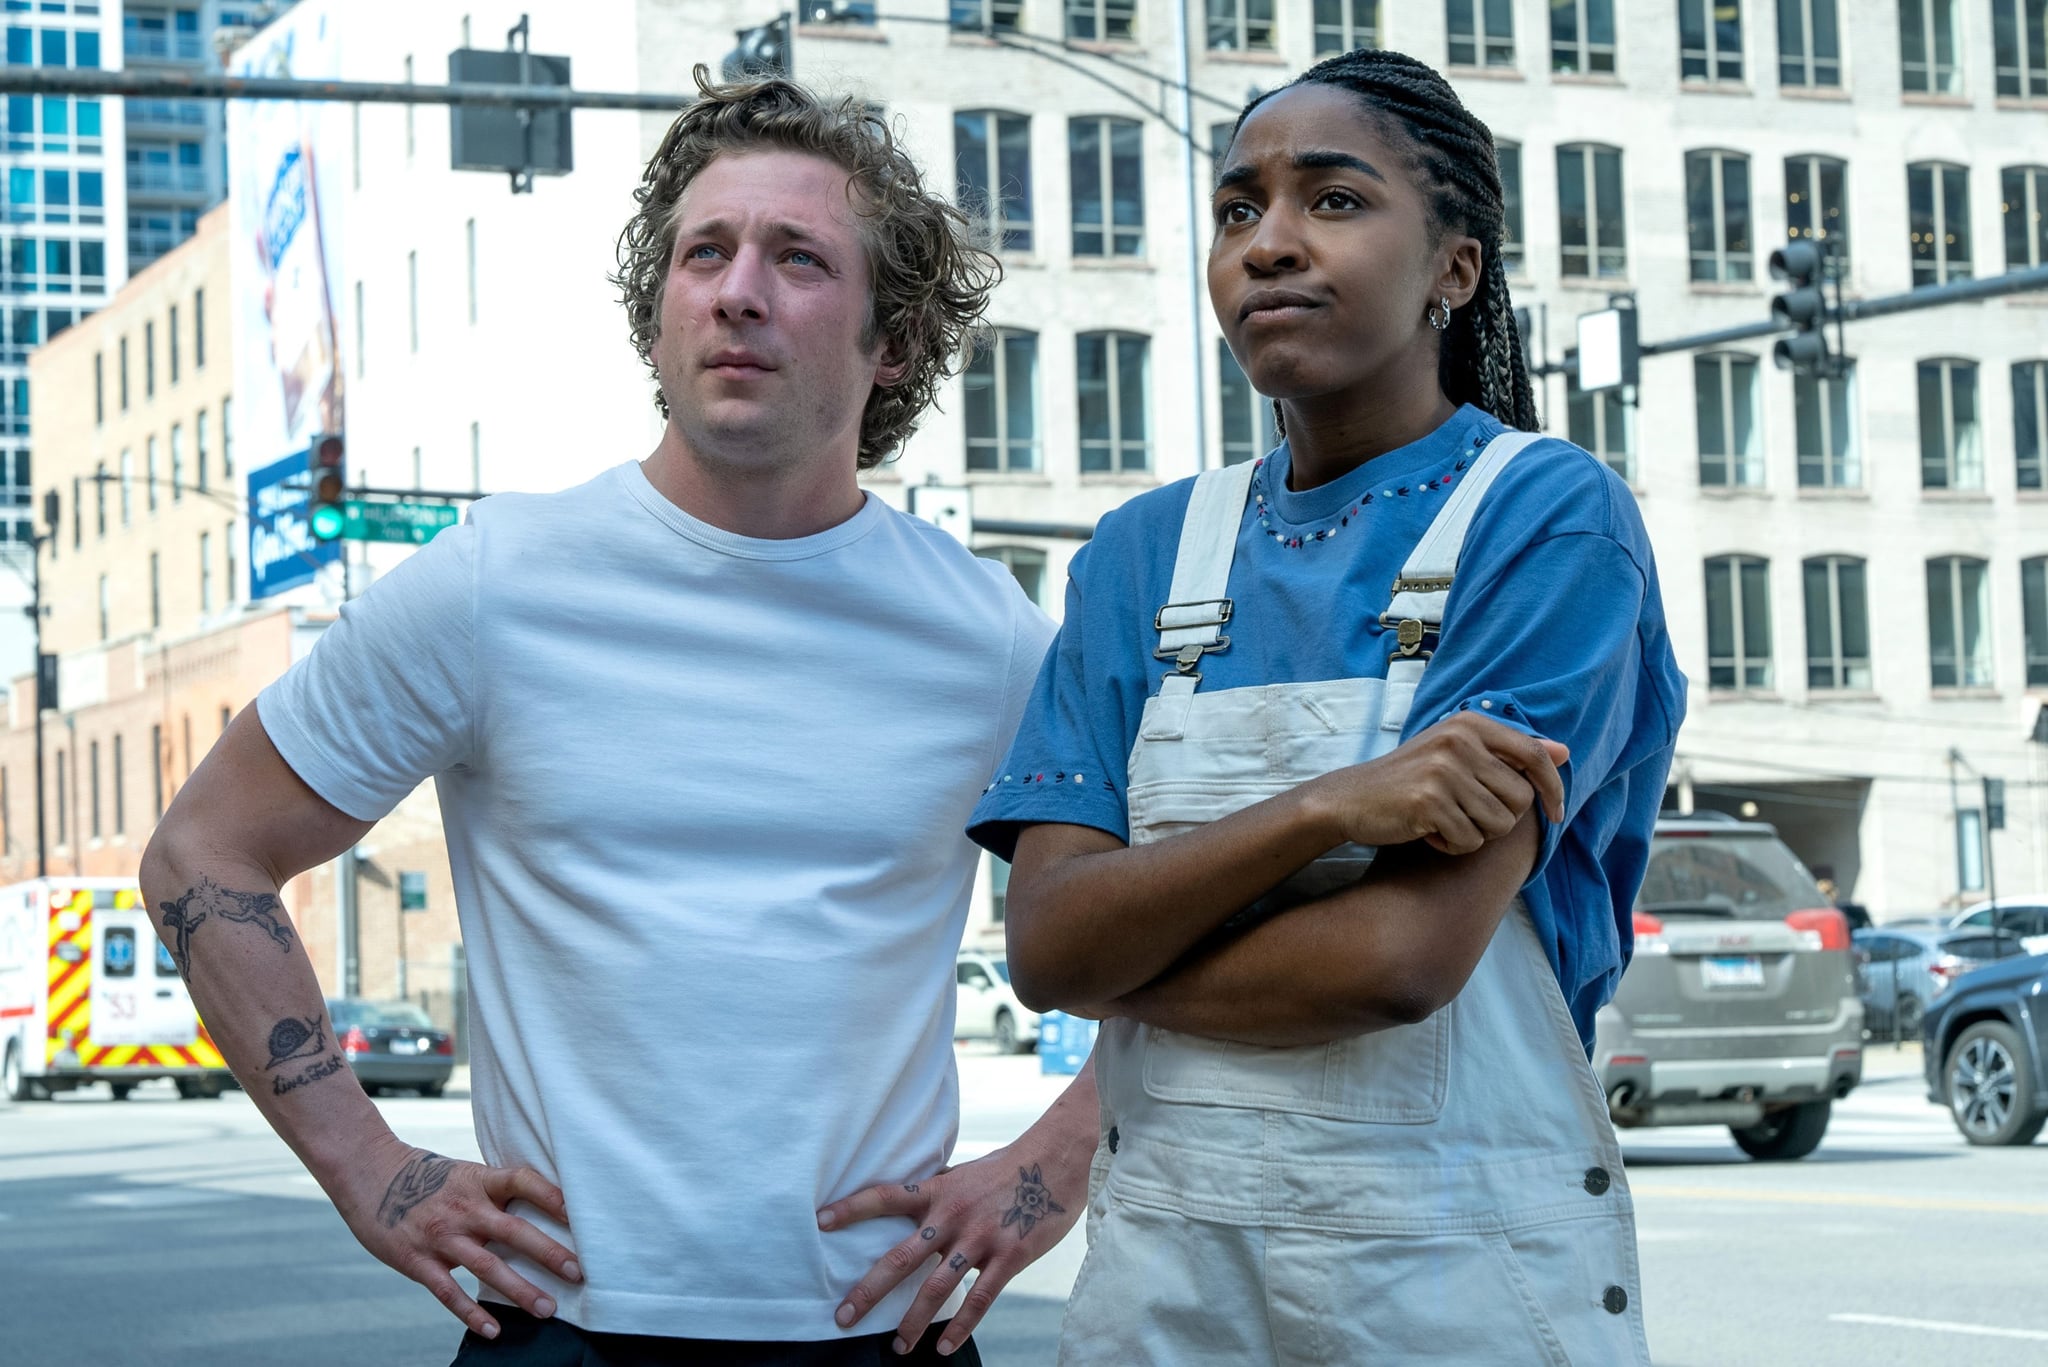 THE BEAR, from left: Jeremy Allen White, Ayo Edebiri, 'Beef', (Season 2, ep. 201, aired June 22, 2023). photo: Chuck Hodes / FX on Hulu / Courtesy Everett Collection